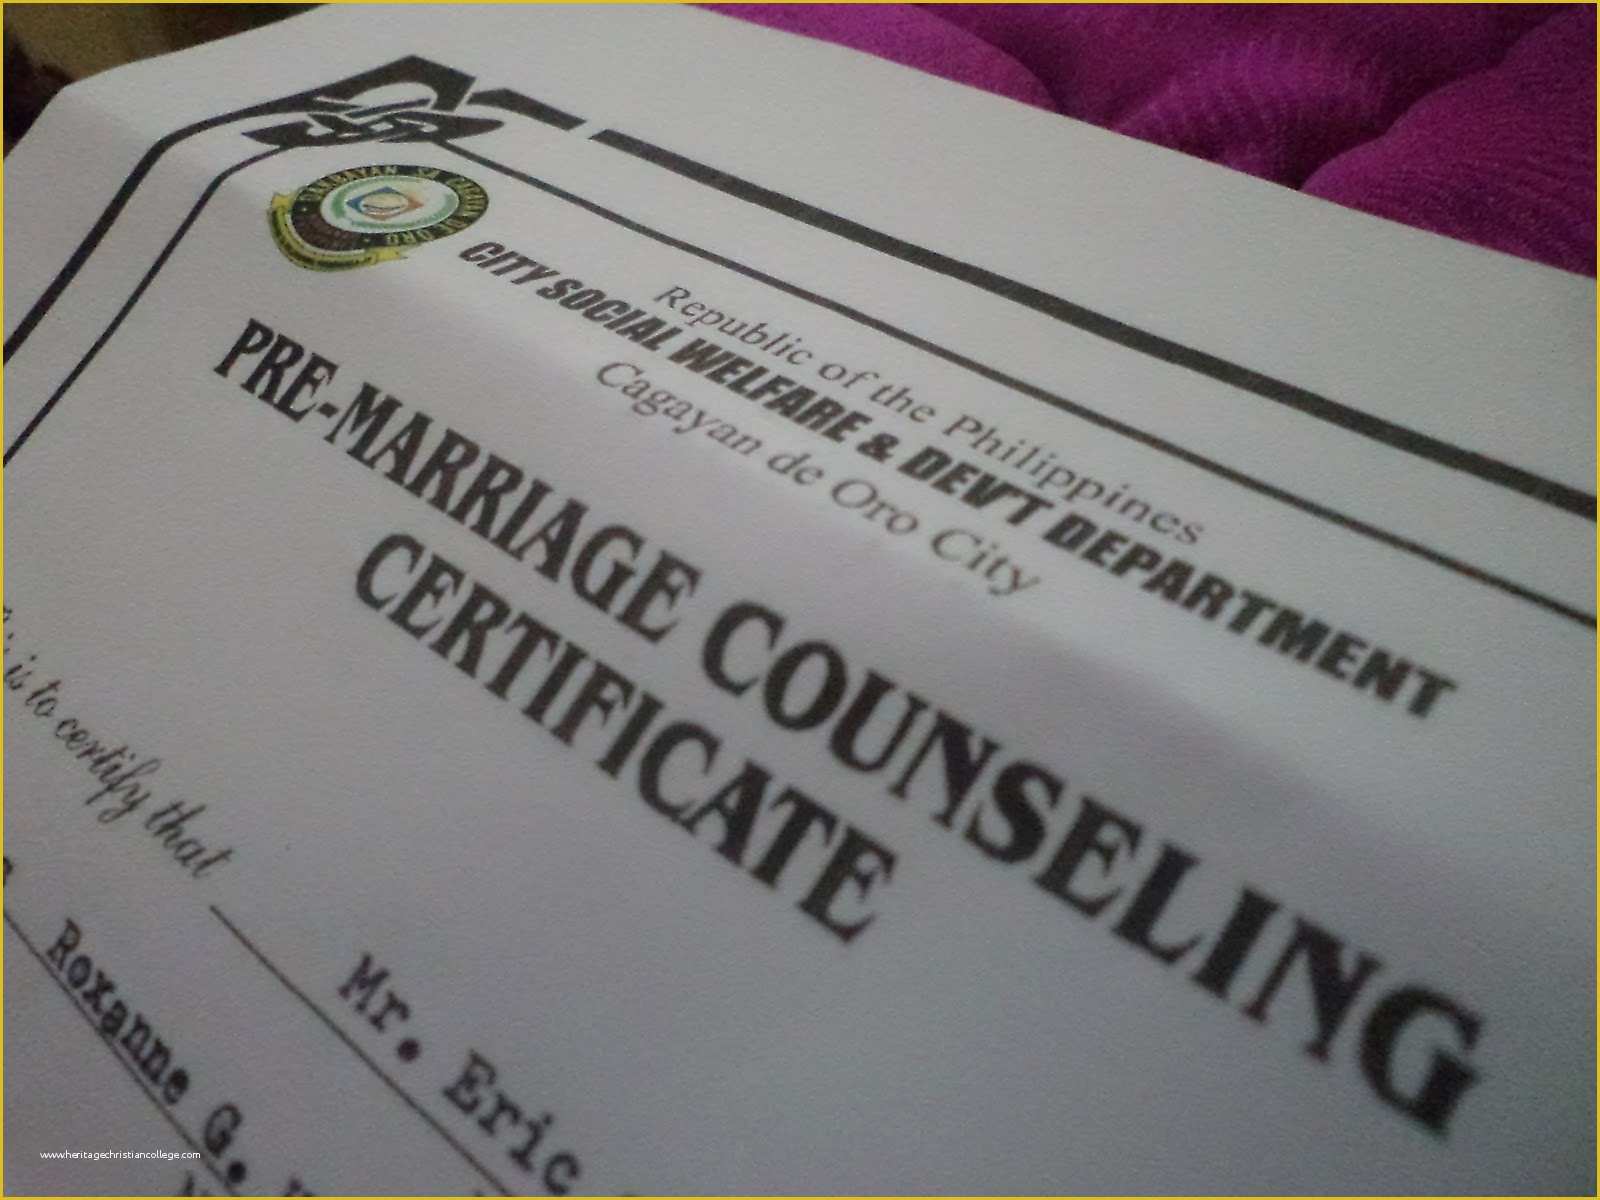 Free Premarital Counseling Certificate Of Completion Template Of Pre Marriage Counseling Certificate Related Keywords Pre